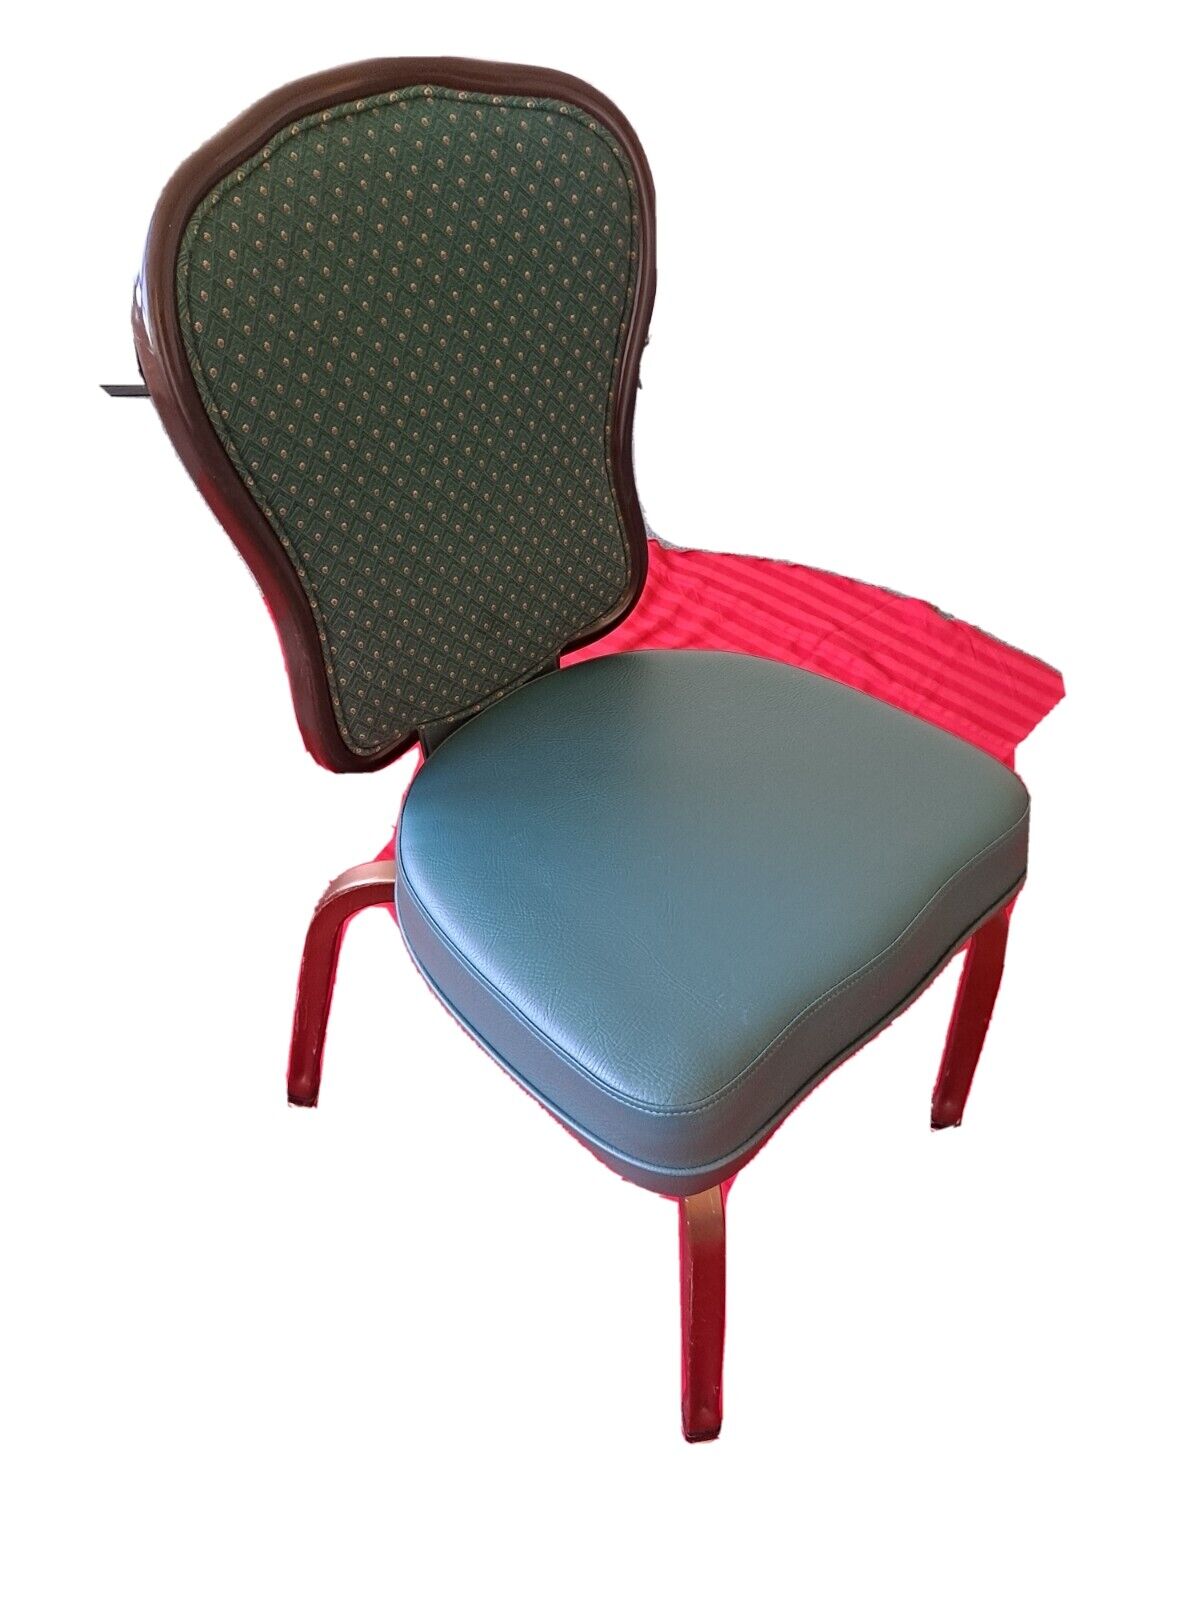 Rare Two-tone Gasser Stackable Banquet Chairs